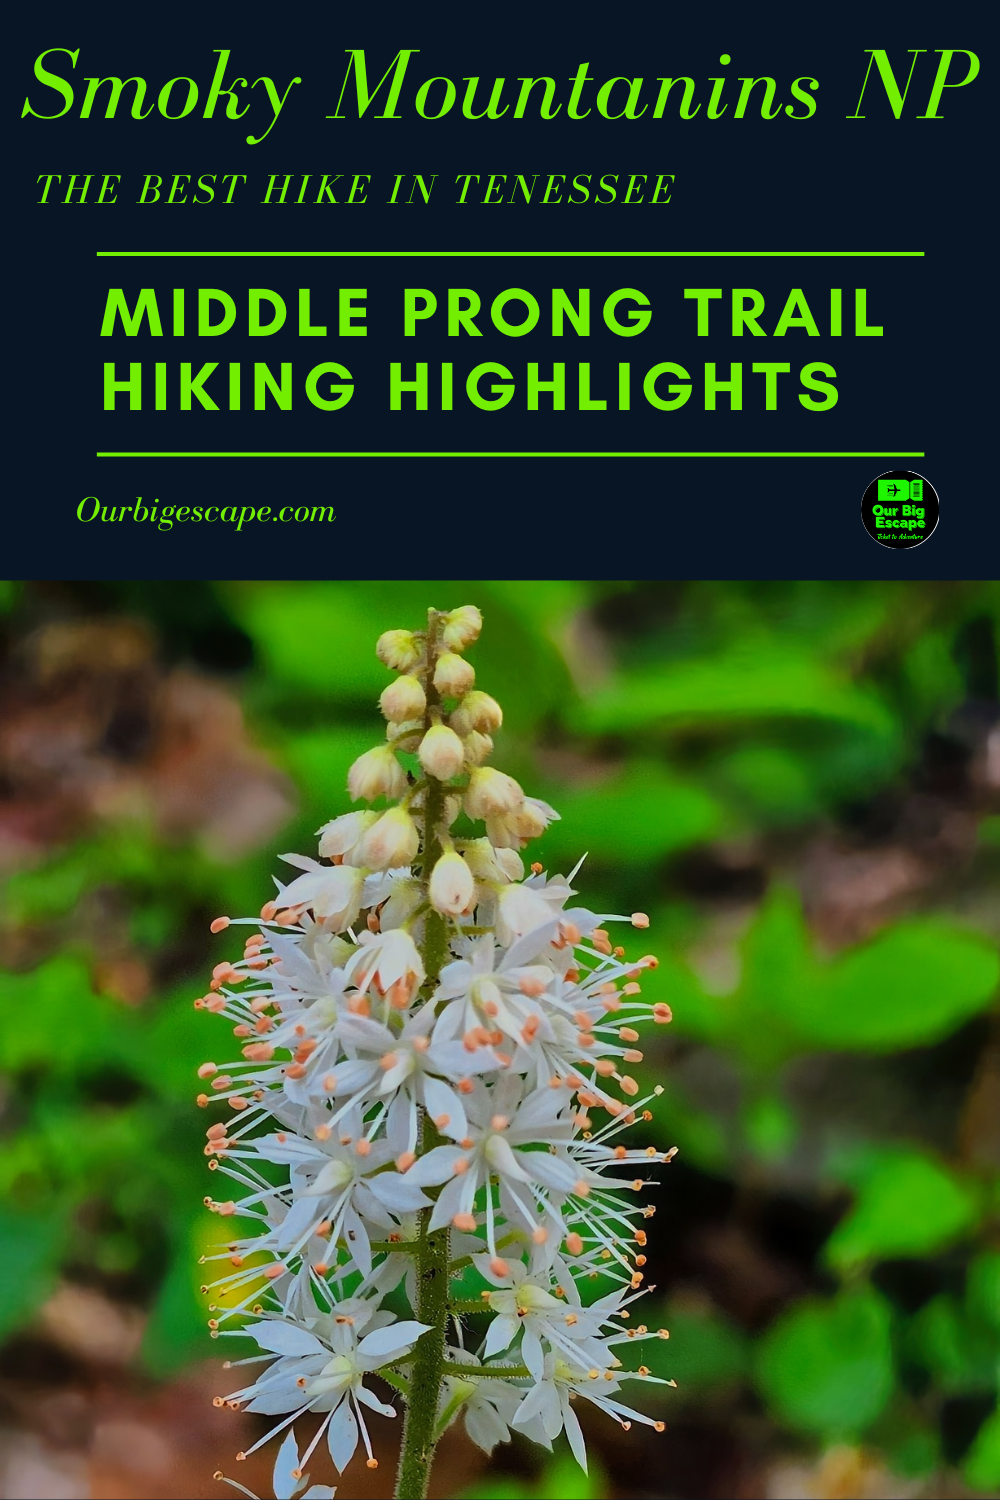 Middle Prong Trail